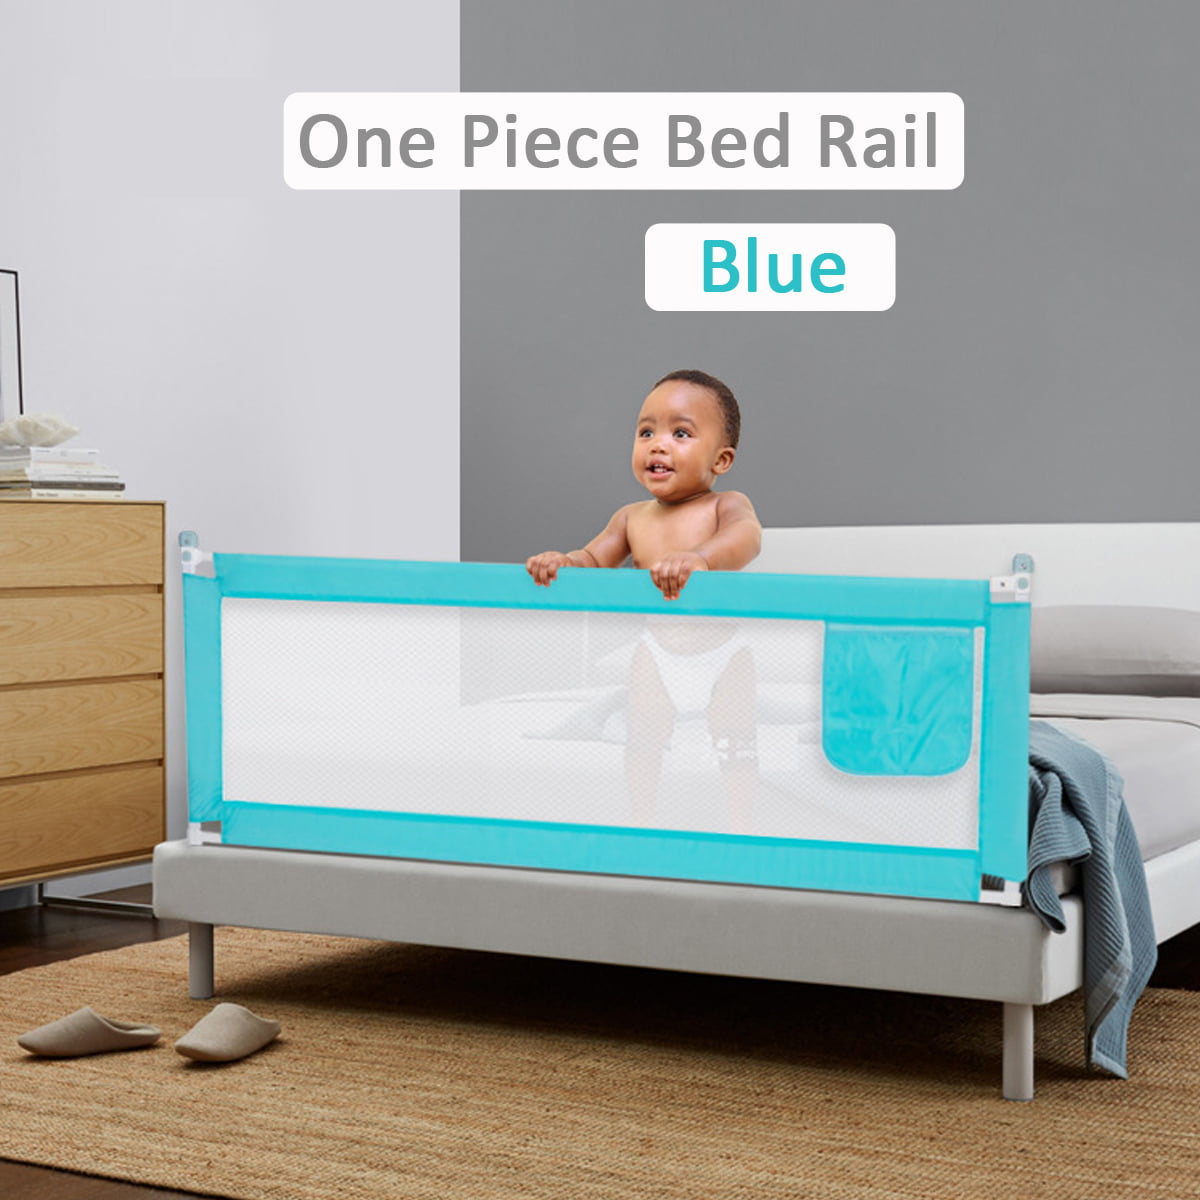 Blue 1.5m Portable Folding Bed Rail Guards Bed Rail Mesh Safety Protection Guard For Toddler Baby & Children 